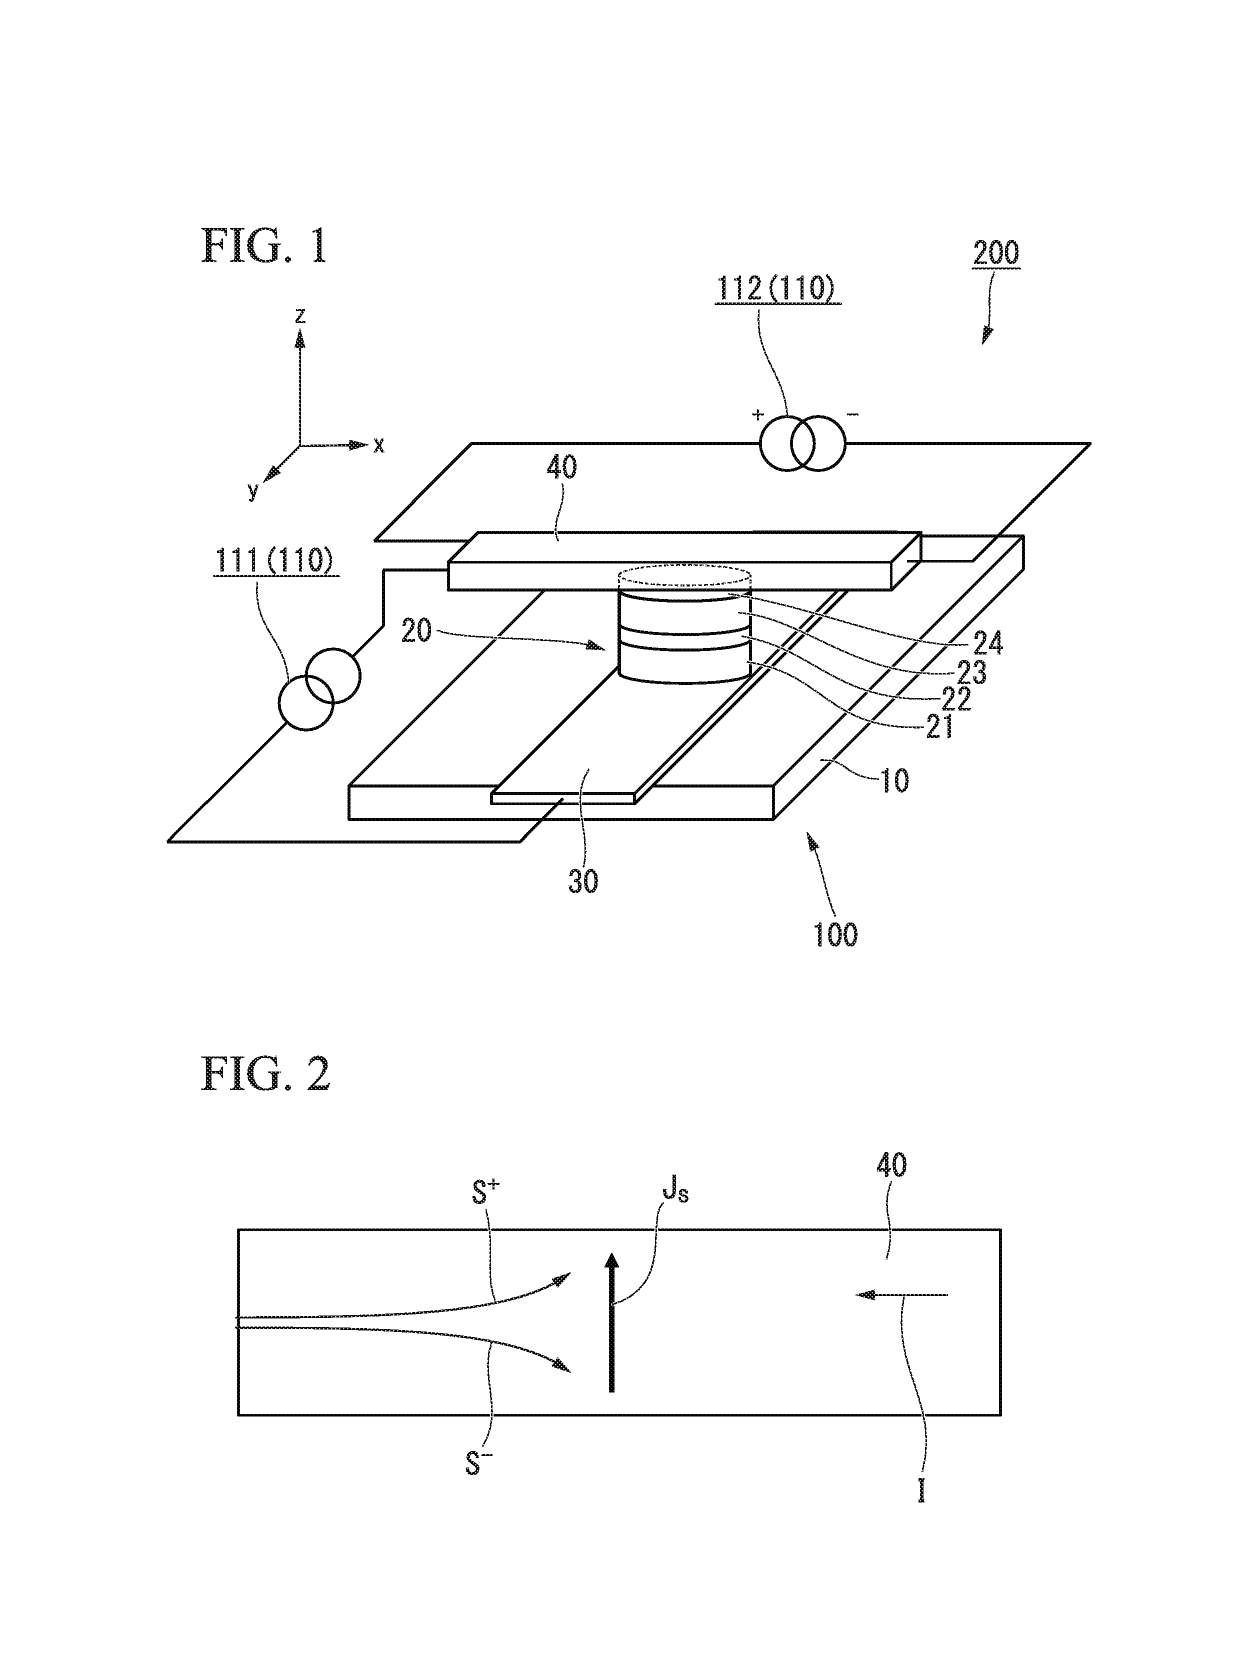 Spin current assisted magnetoresistance effect device